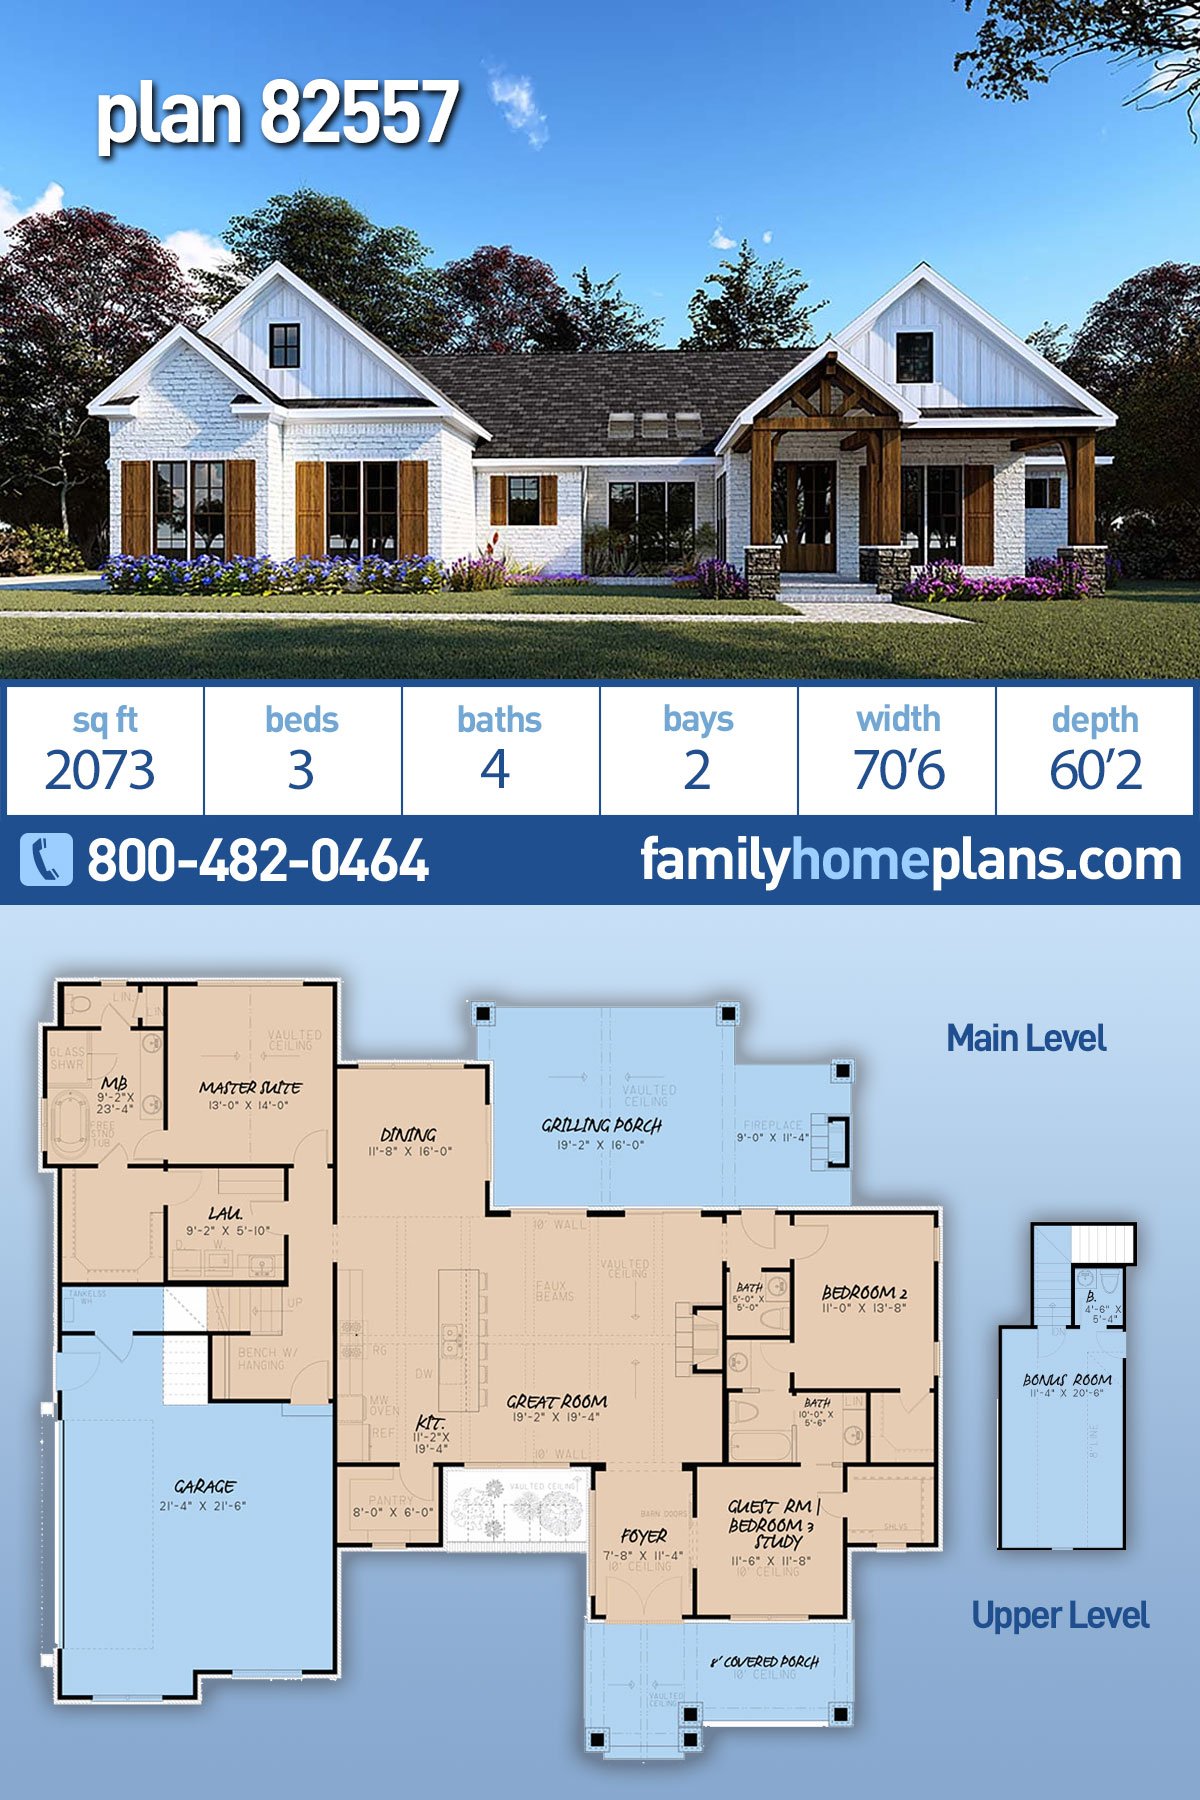 Bungalow, Craftsman, Farmhouse, One-Story House Plan 82557 with 3 Bed, 4 Bath, 2 Car Garage